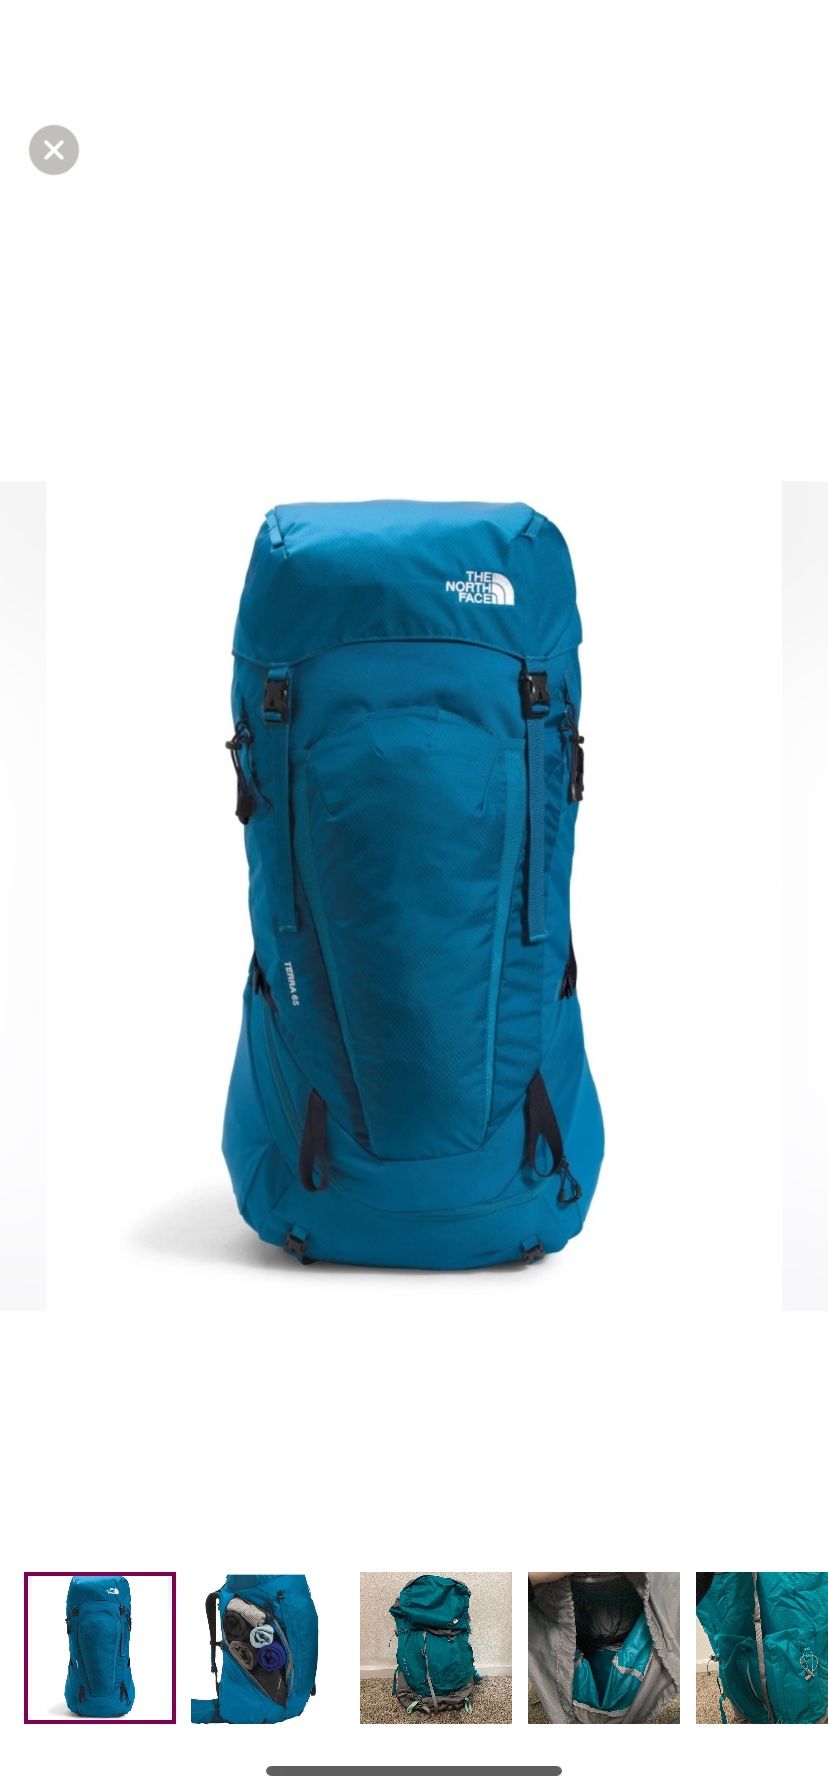 North face branchee 50  hiking bag